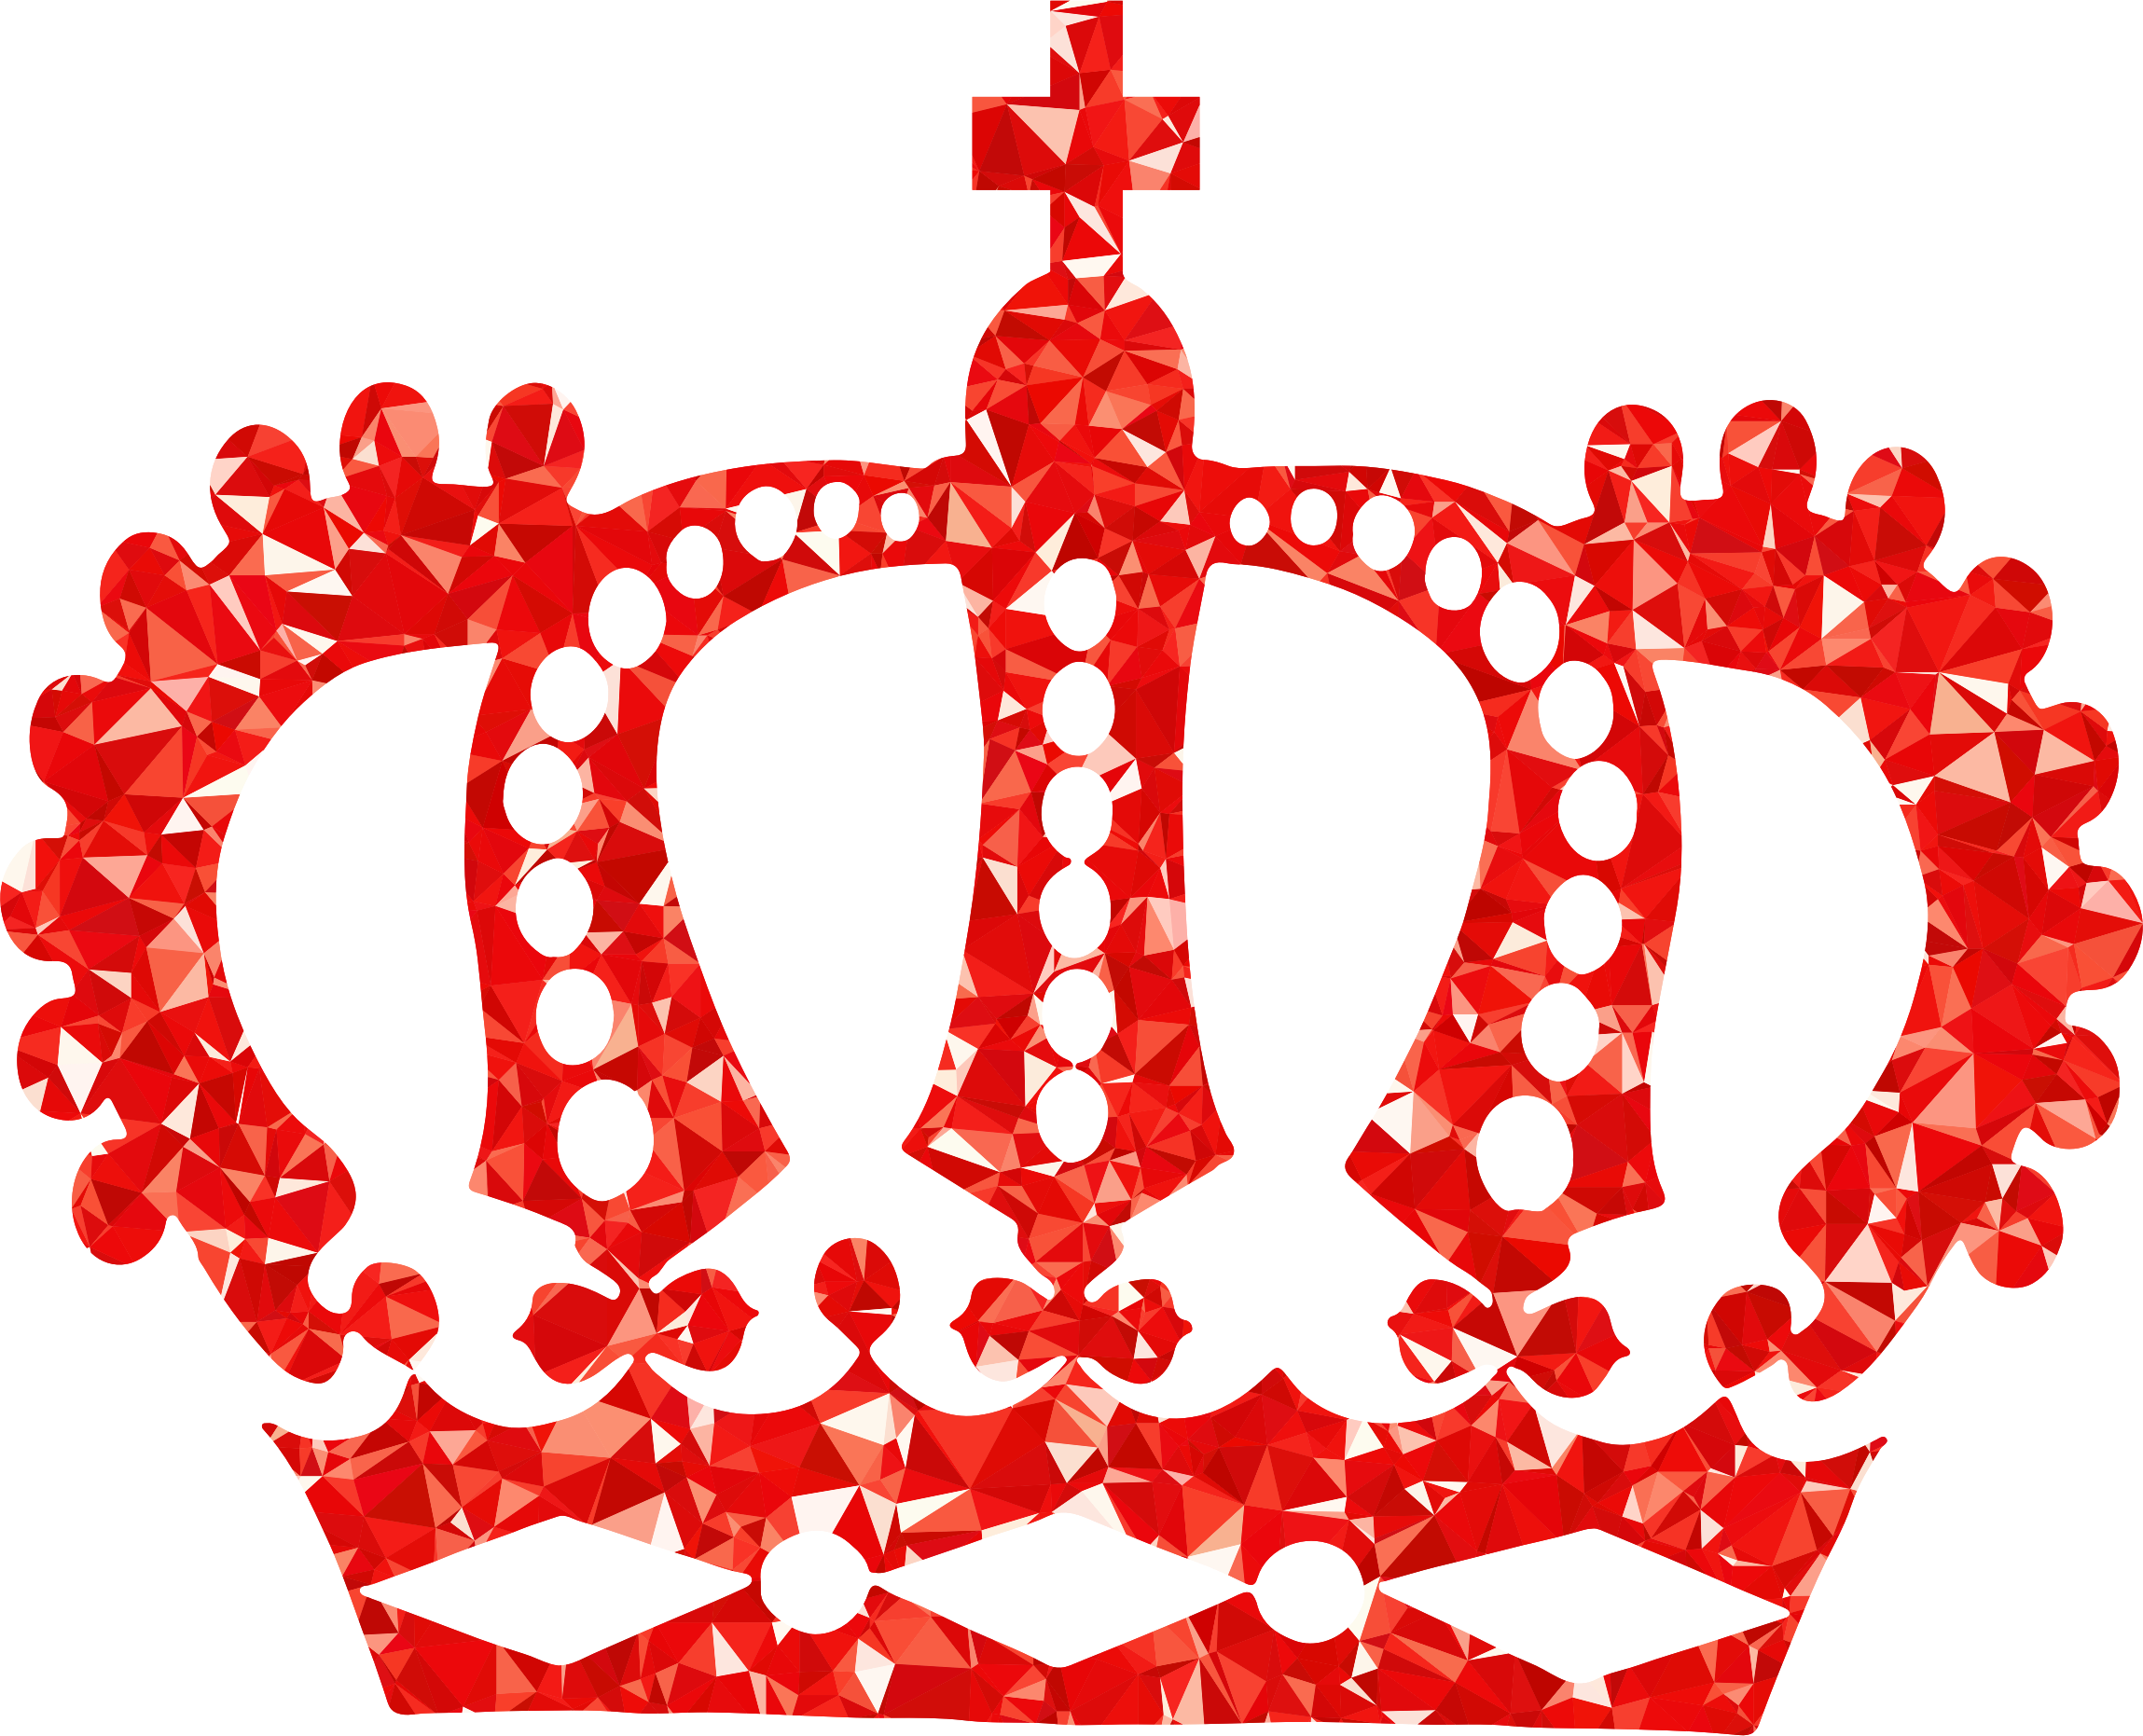 Queen Red Crown Png - All images in this category are high resolution ...